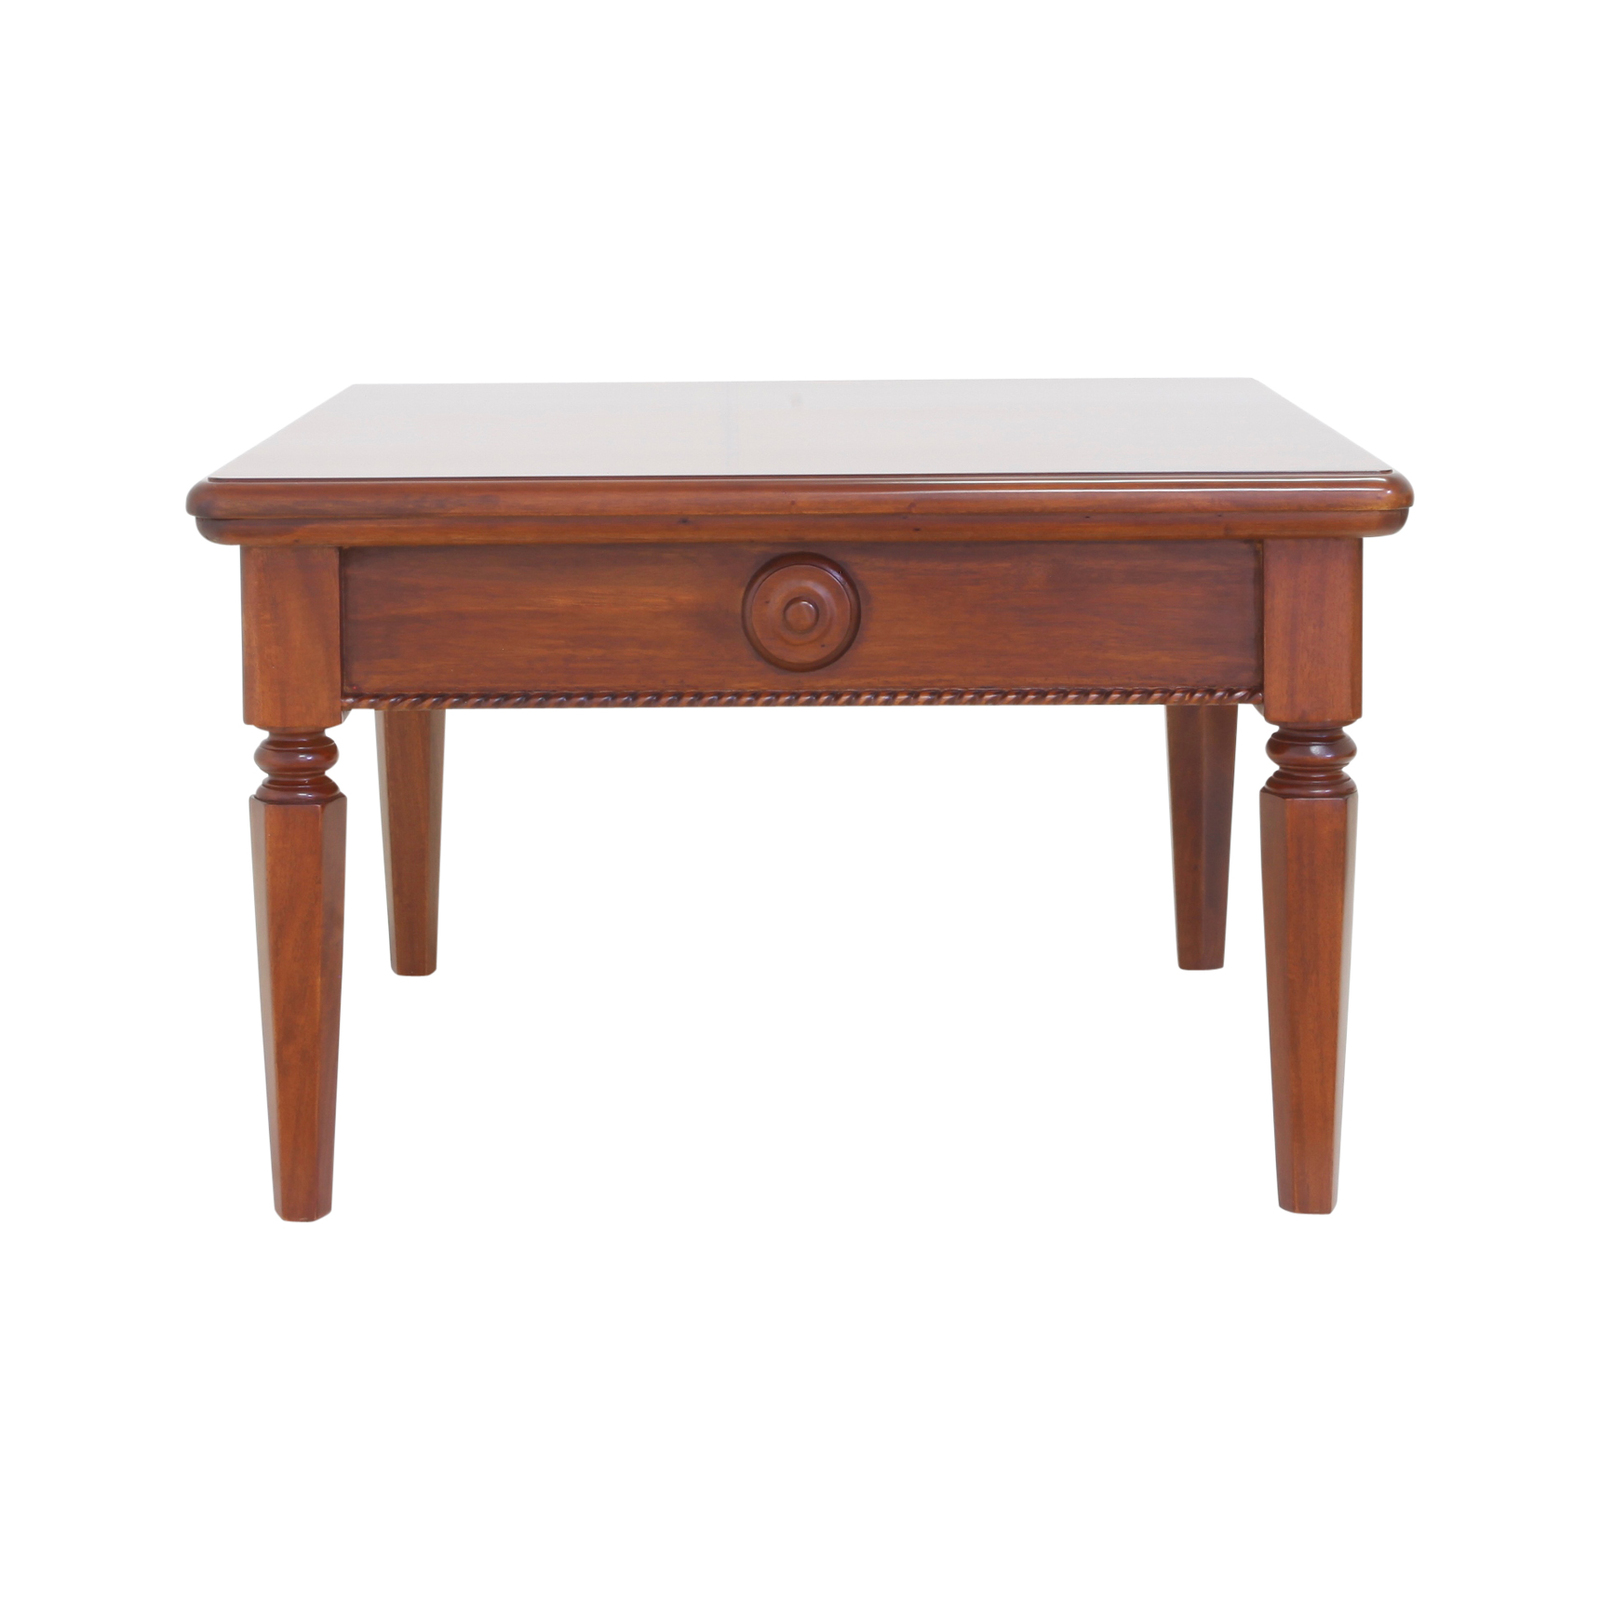 Antique Colonial Style Mahogany Wood Square Coffee Table 9175